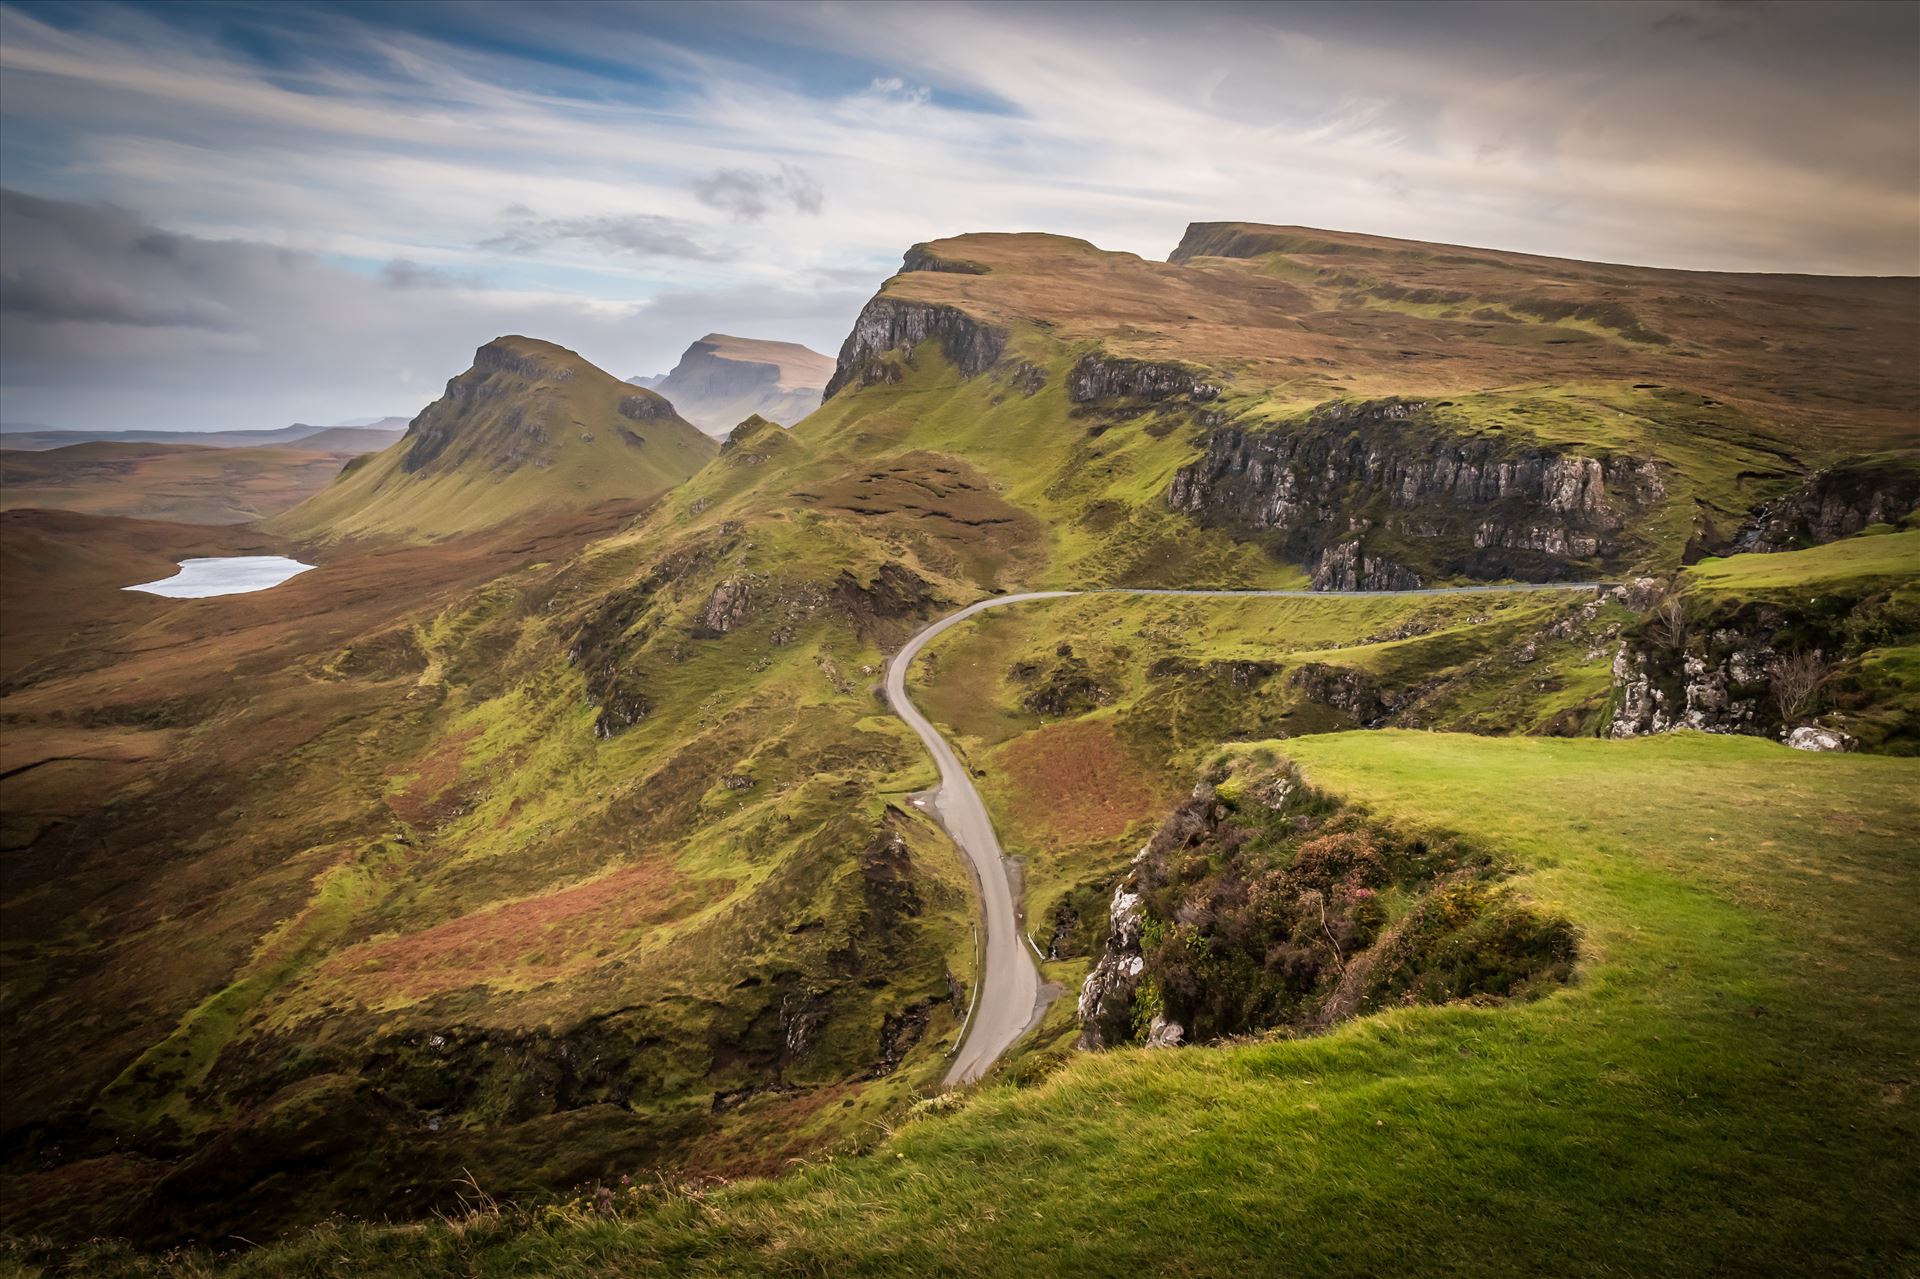 The Quiraing (2) - The Quiraing is a landslip on the northernmost summit of the Trotternish on the Isle of Skye. The whole of the Trotternish Ridge escarpment was formed by a great series of landslips, the Quiraing is the only part of the slip still moving. by philreay